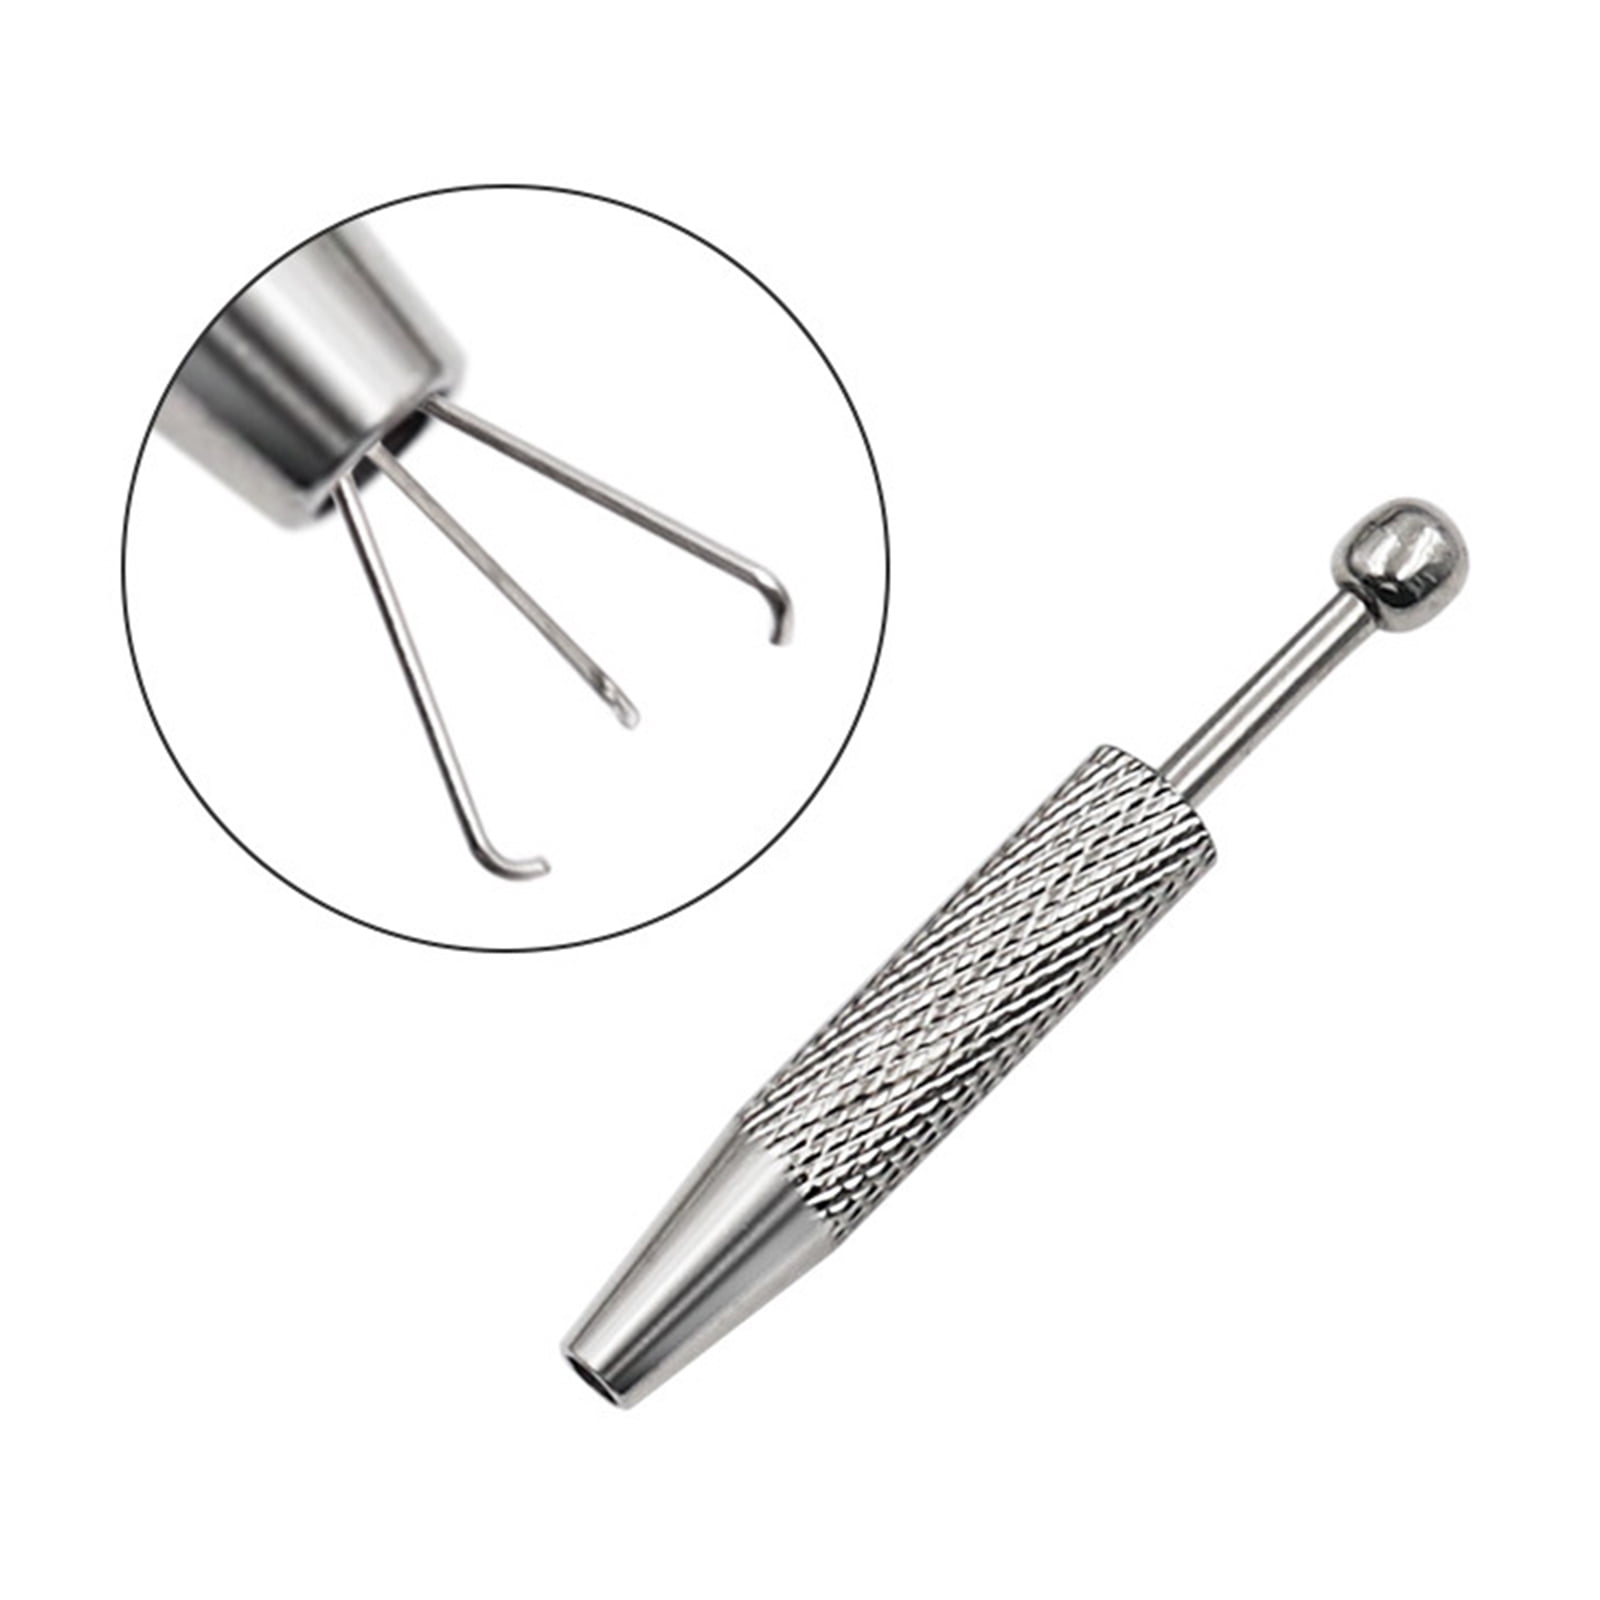 3 Pack 4 Prongs Jeweler's Pick up Tool Stainless Steel Piercing Ball  Grabber 4-Claw Pick up Tool for Small Parts Pearl Grabber Pick Up Tool for  IC